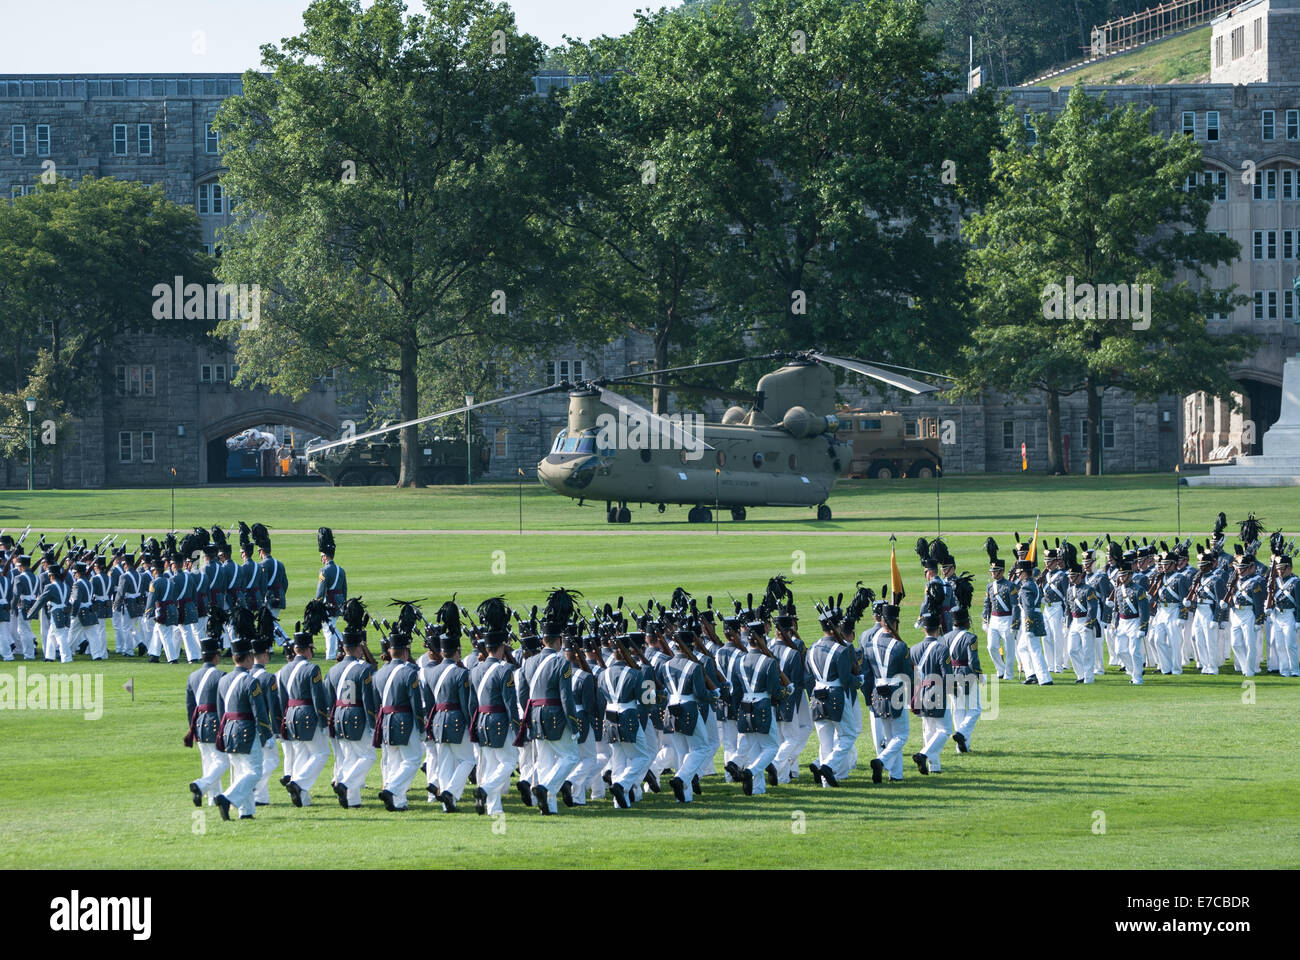 Opening day parade at West Point, NY for the first home football game of the season. Stock Photo